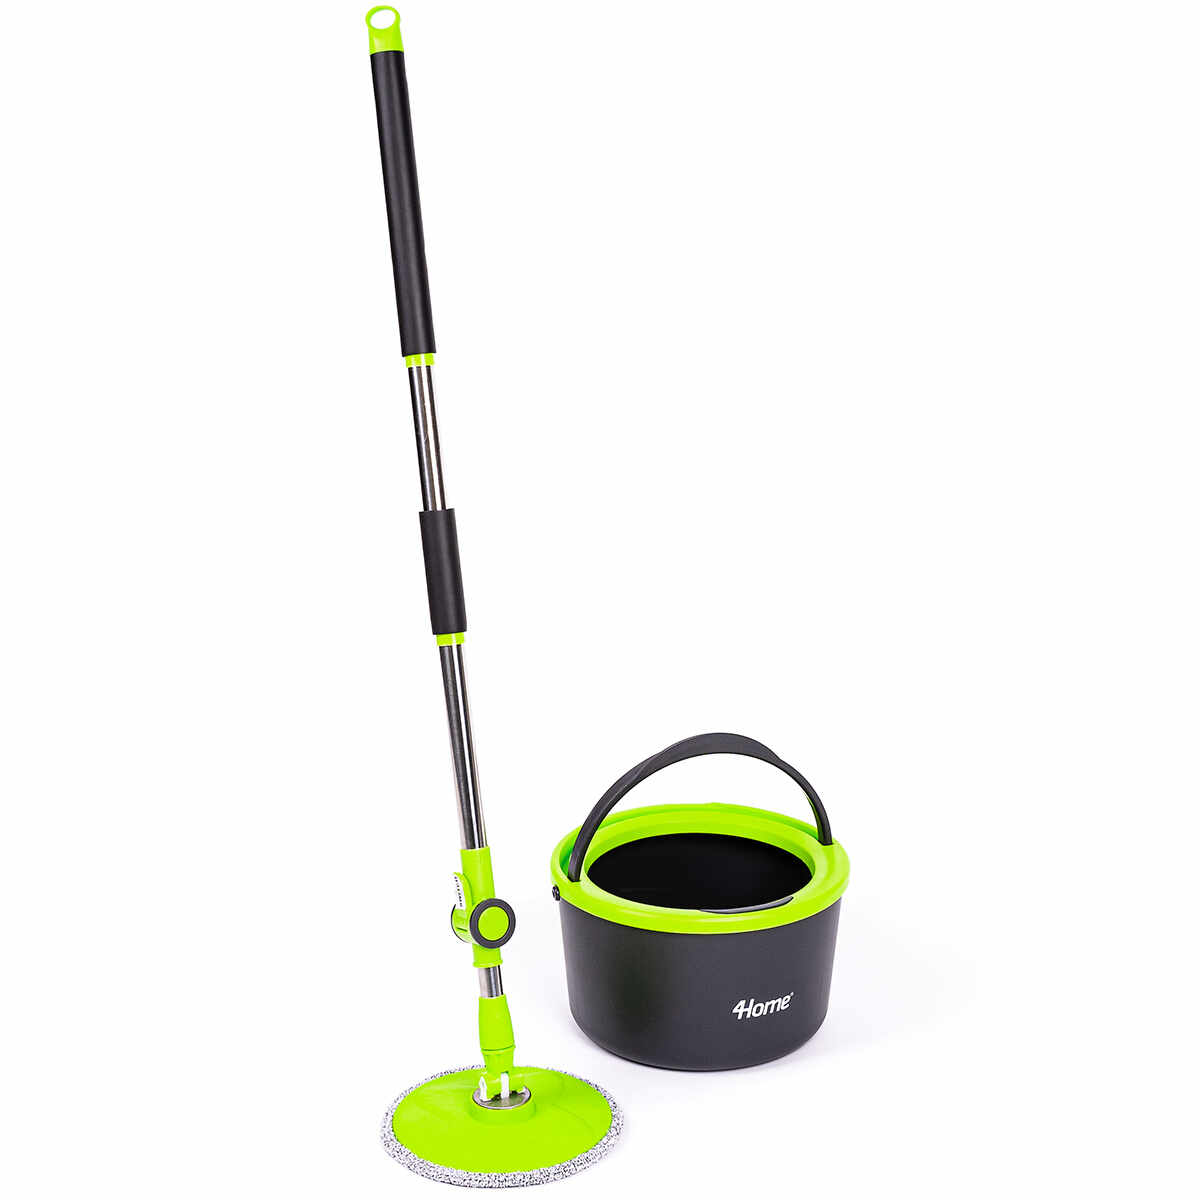 Mop 4Home Rapid Clean Compact Spin